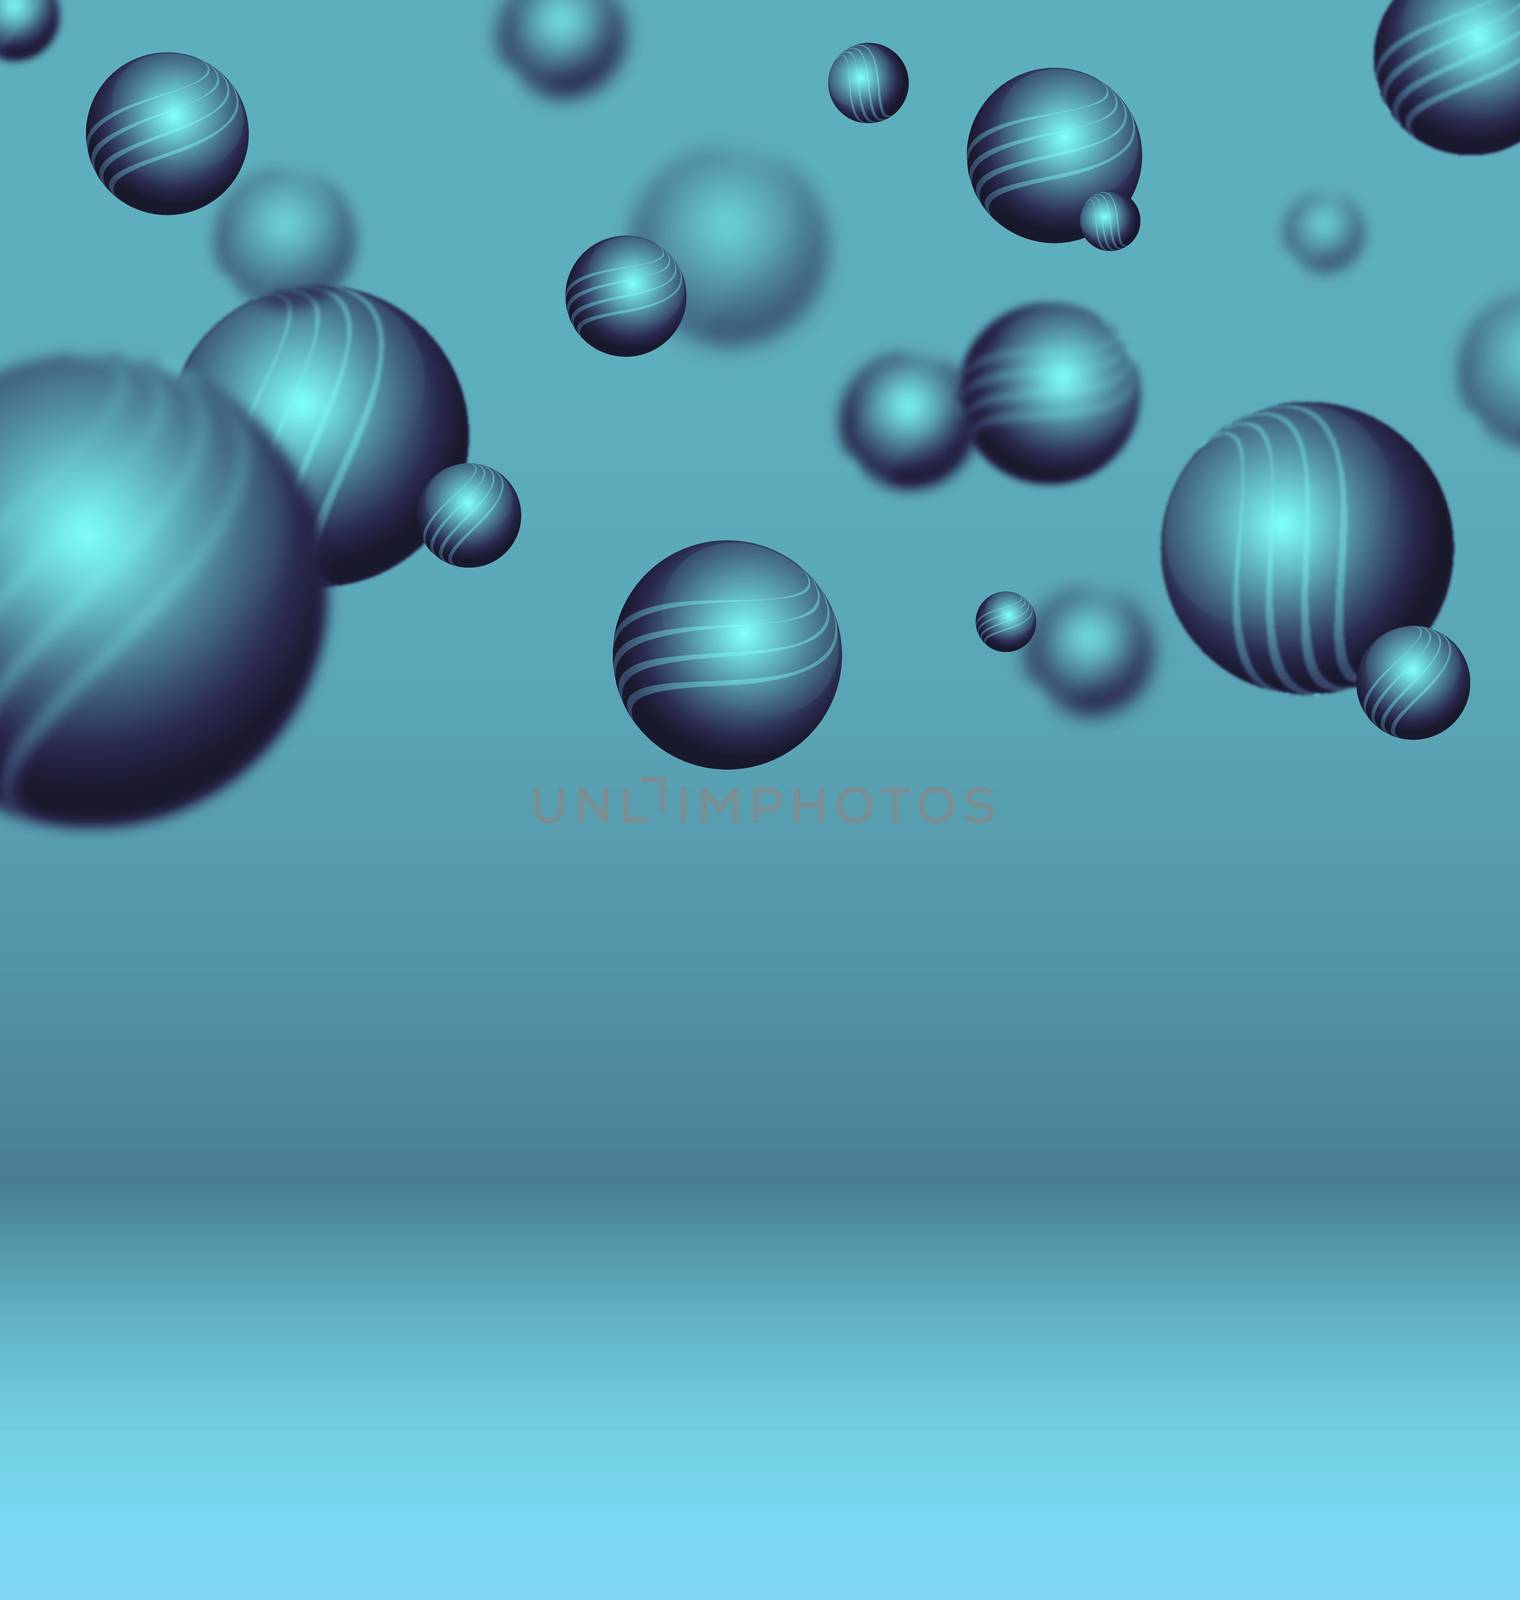 Abstract technology background with balls by stocklady